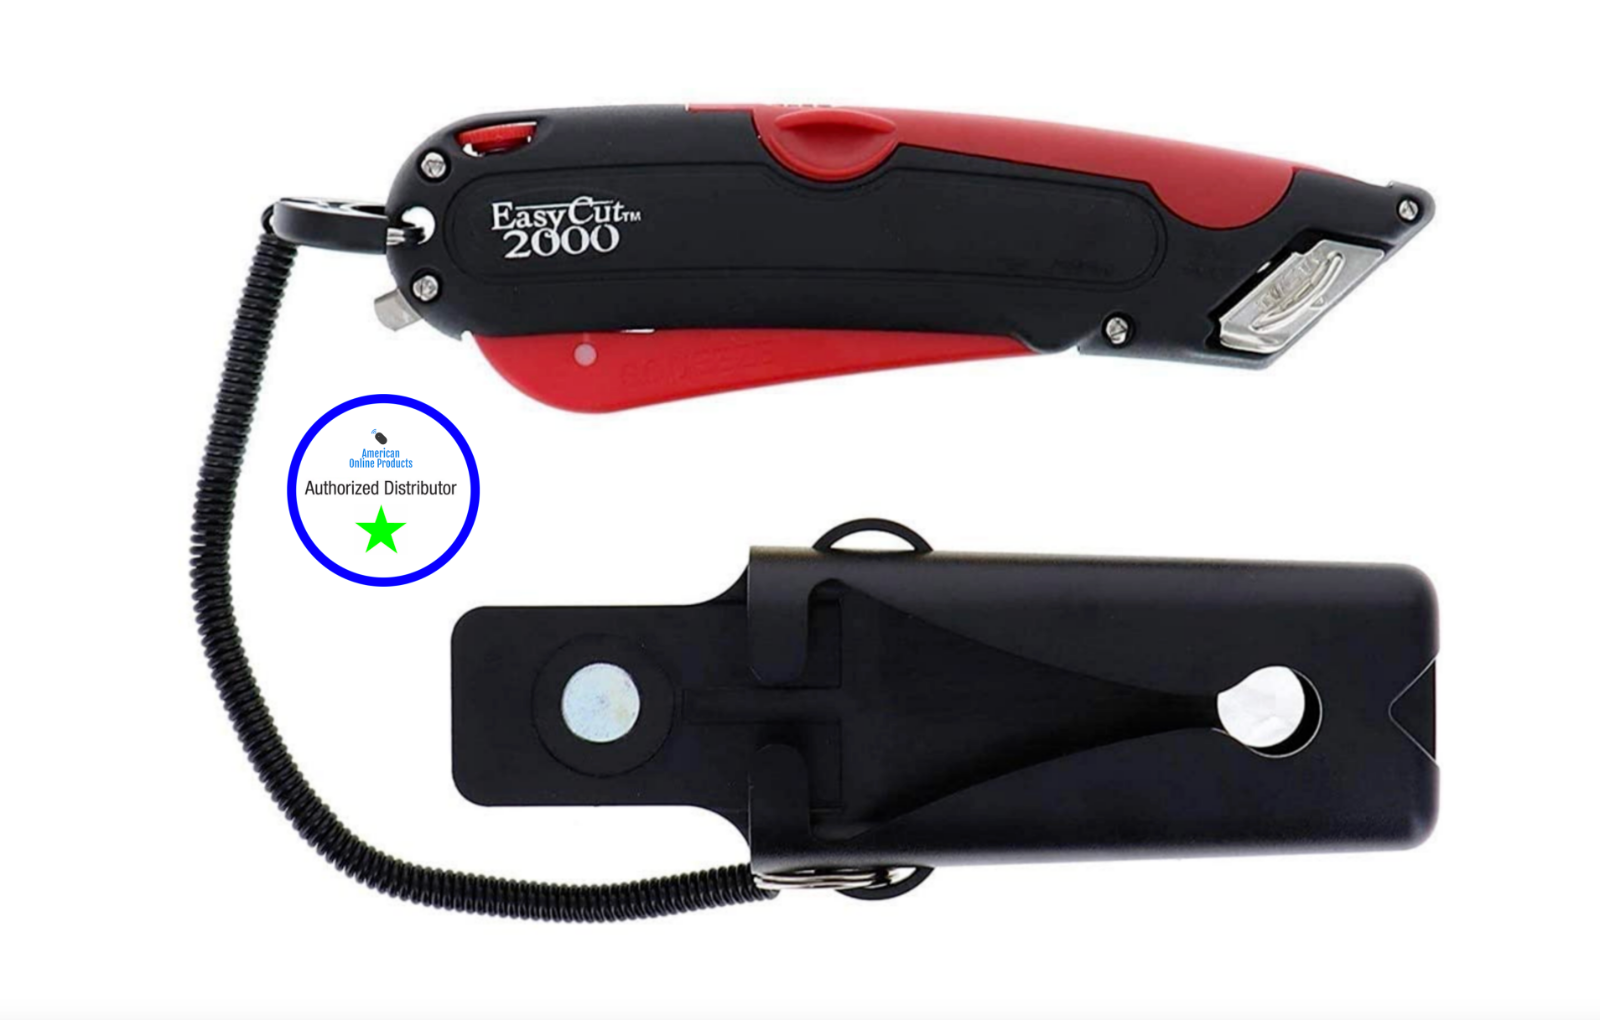 Easy Cut 2000 Red Safety Box Cutter Knife W/ Holster & Lanyard Easycut Best Deal